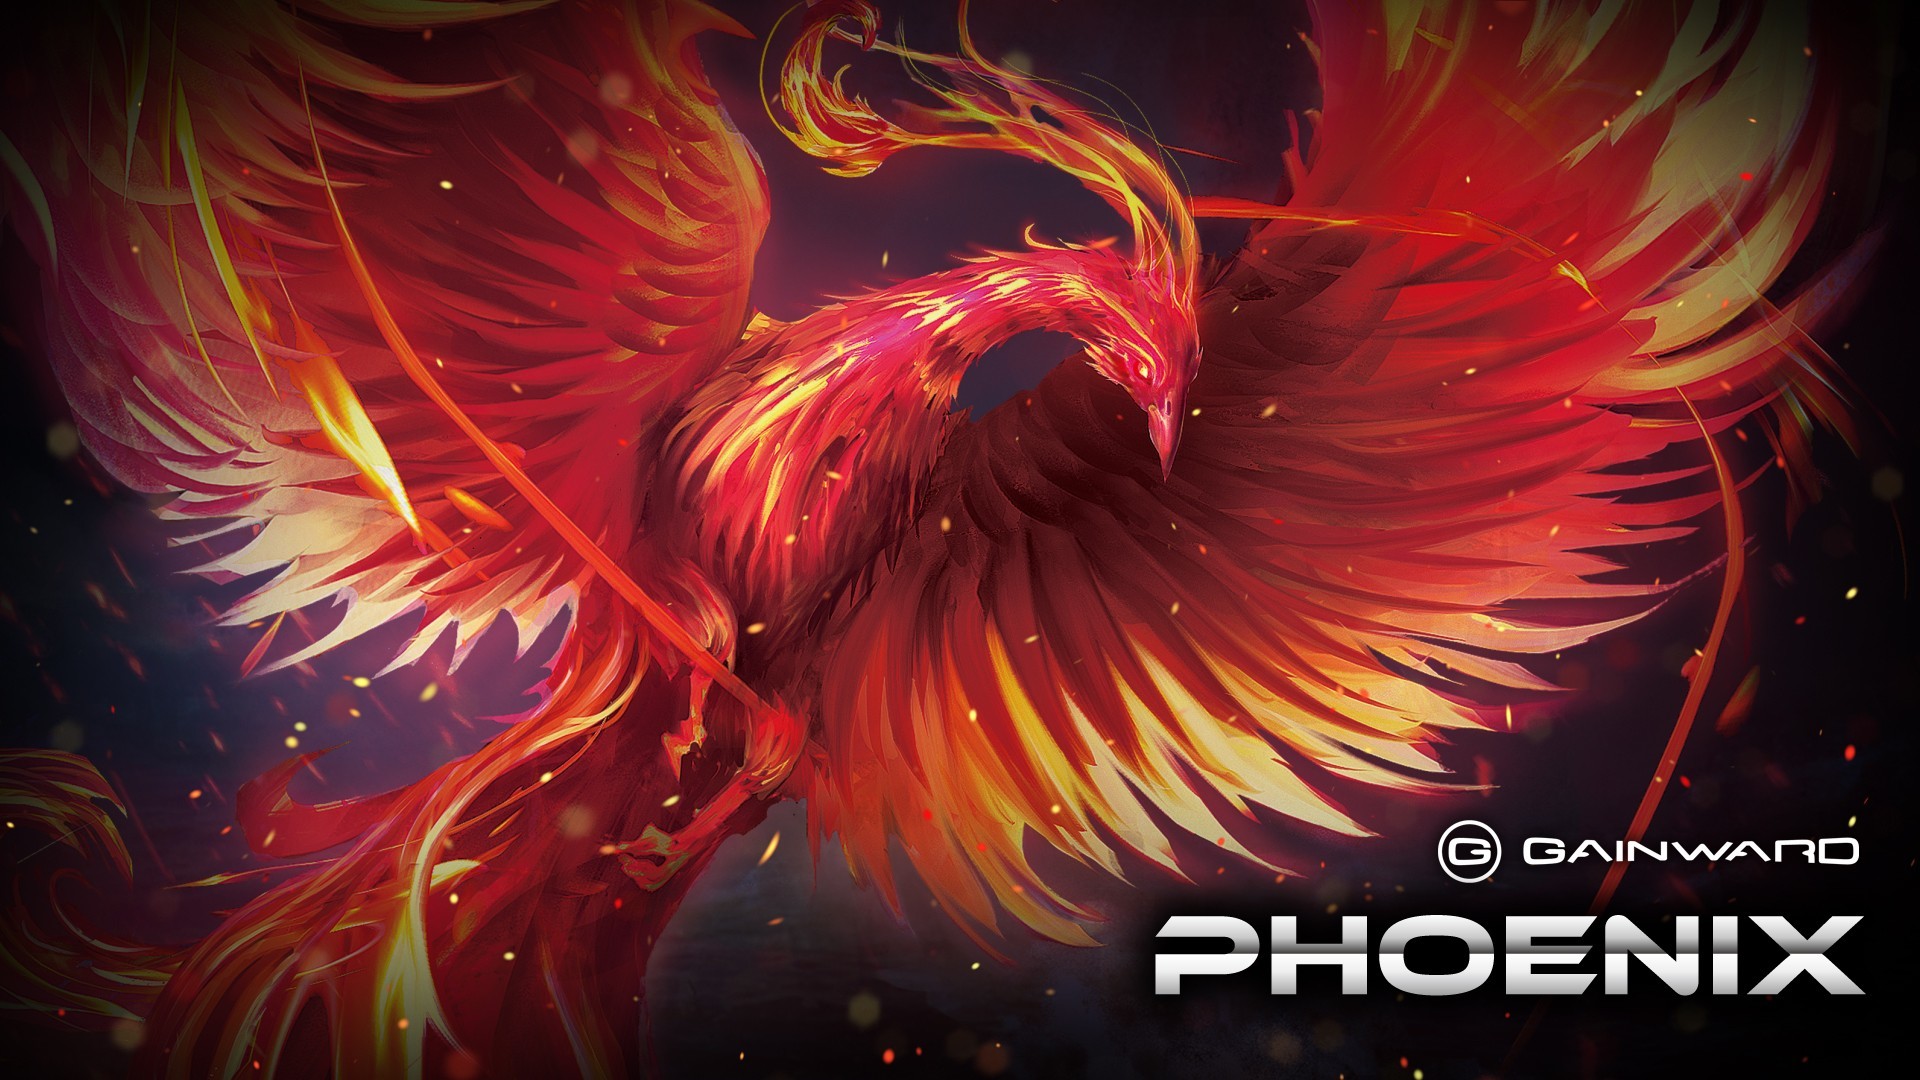 1920x1080 Wallpaper HD Phoenix Bird Images with image resolution  pixel. You  can make this wallpaper